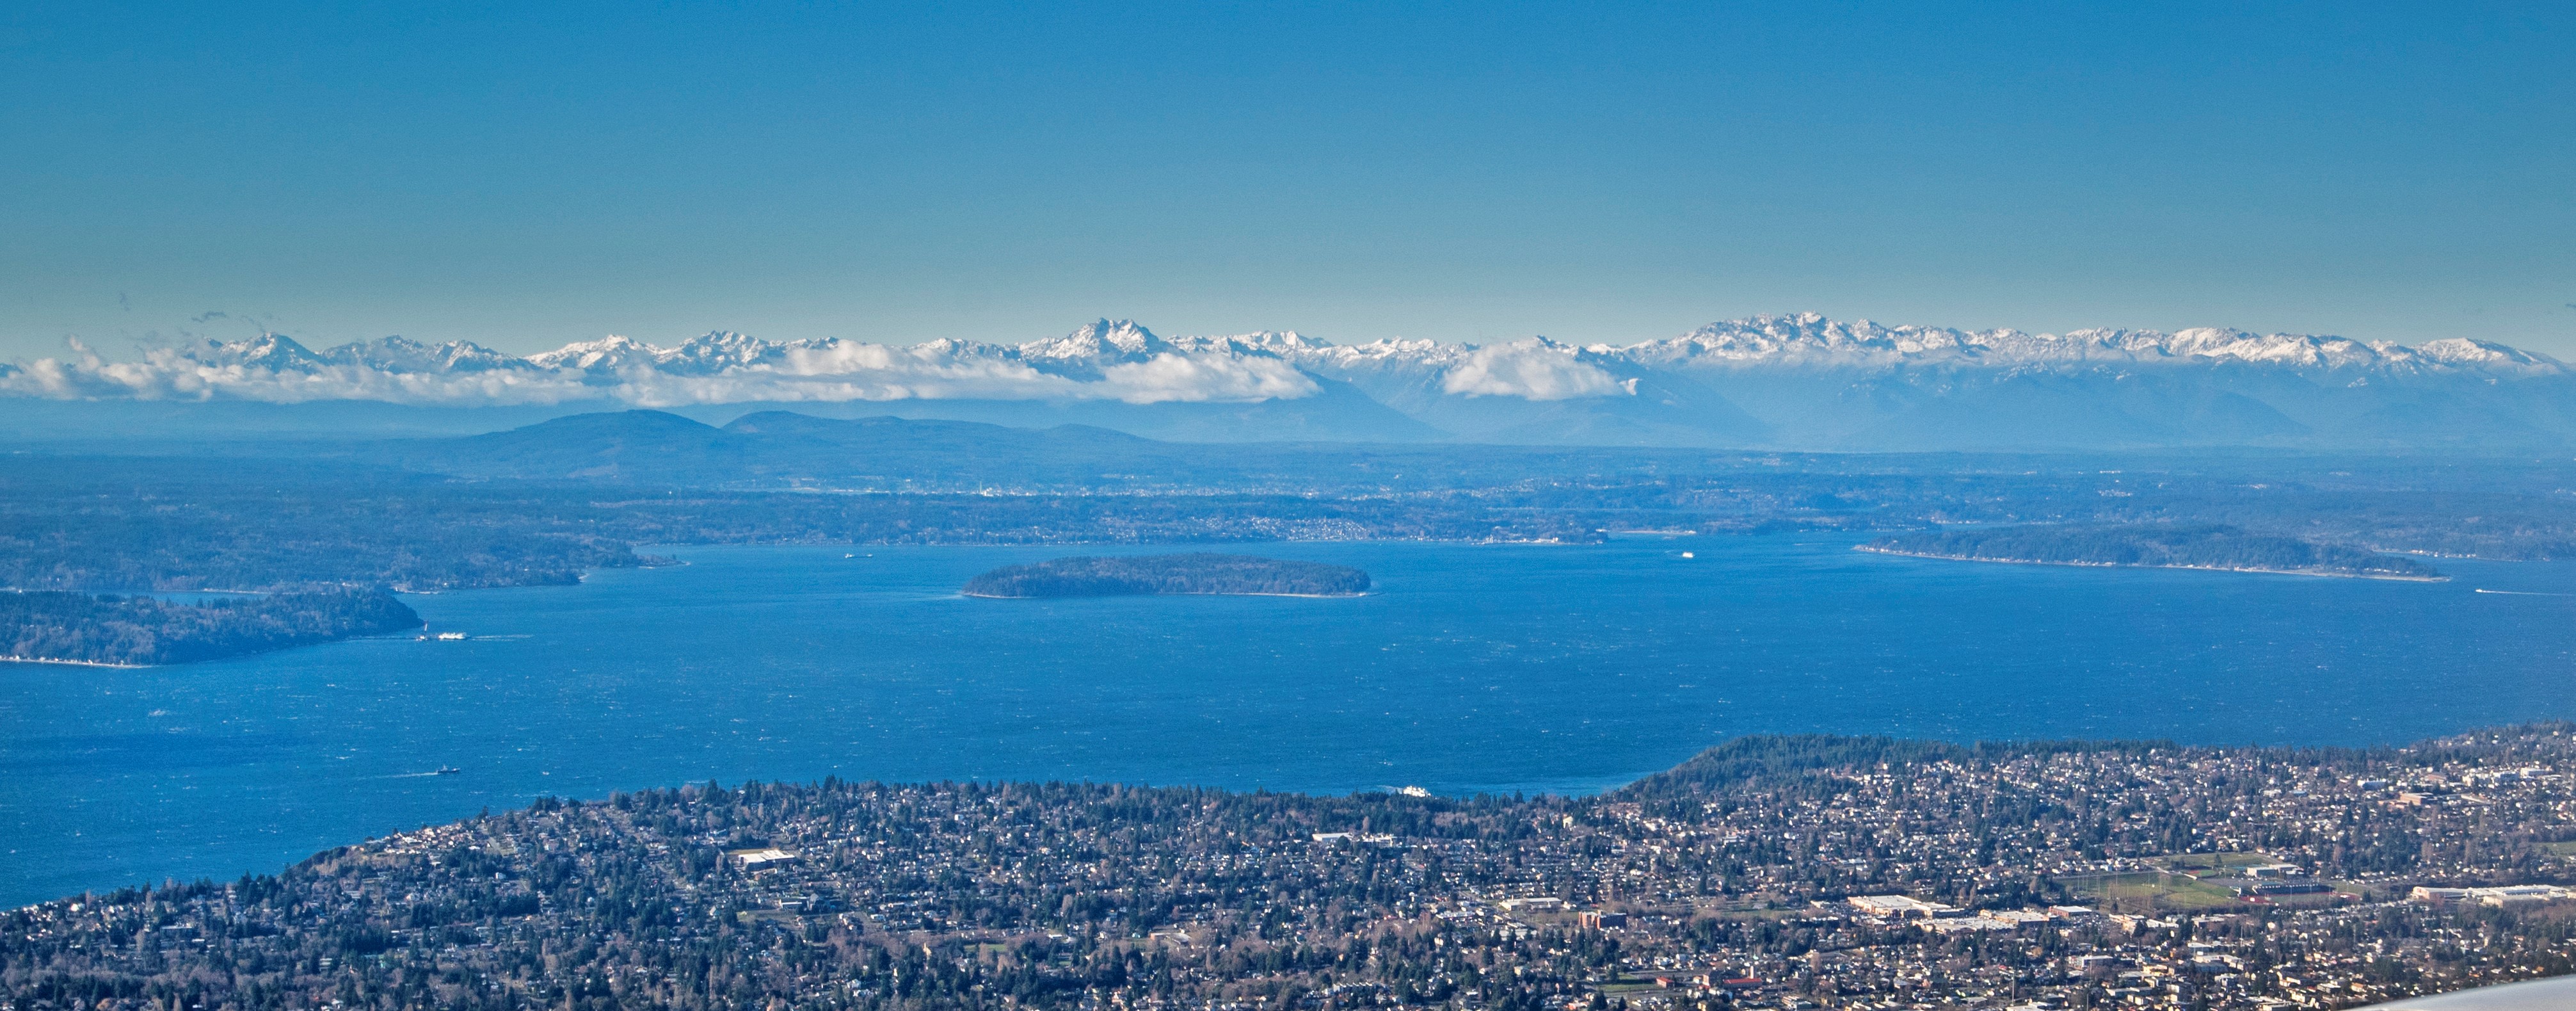 Burien and Olympic Mountains